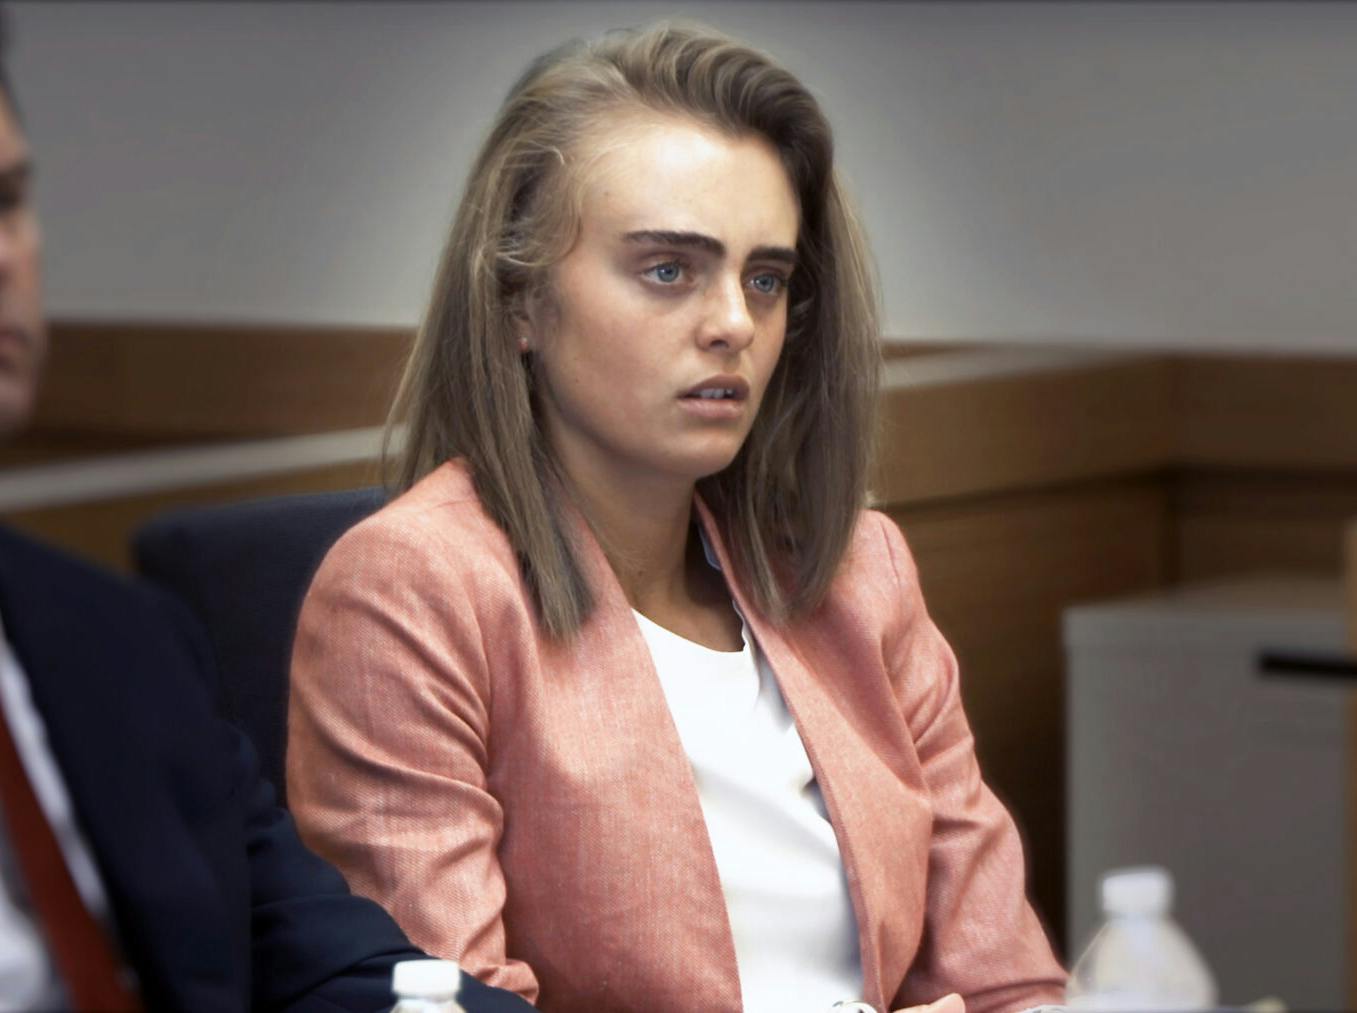 'I Love You, Now Die: The Commonwealth vs Michelle Carter'